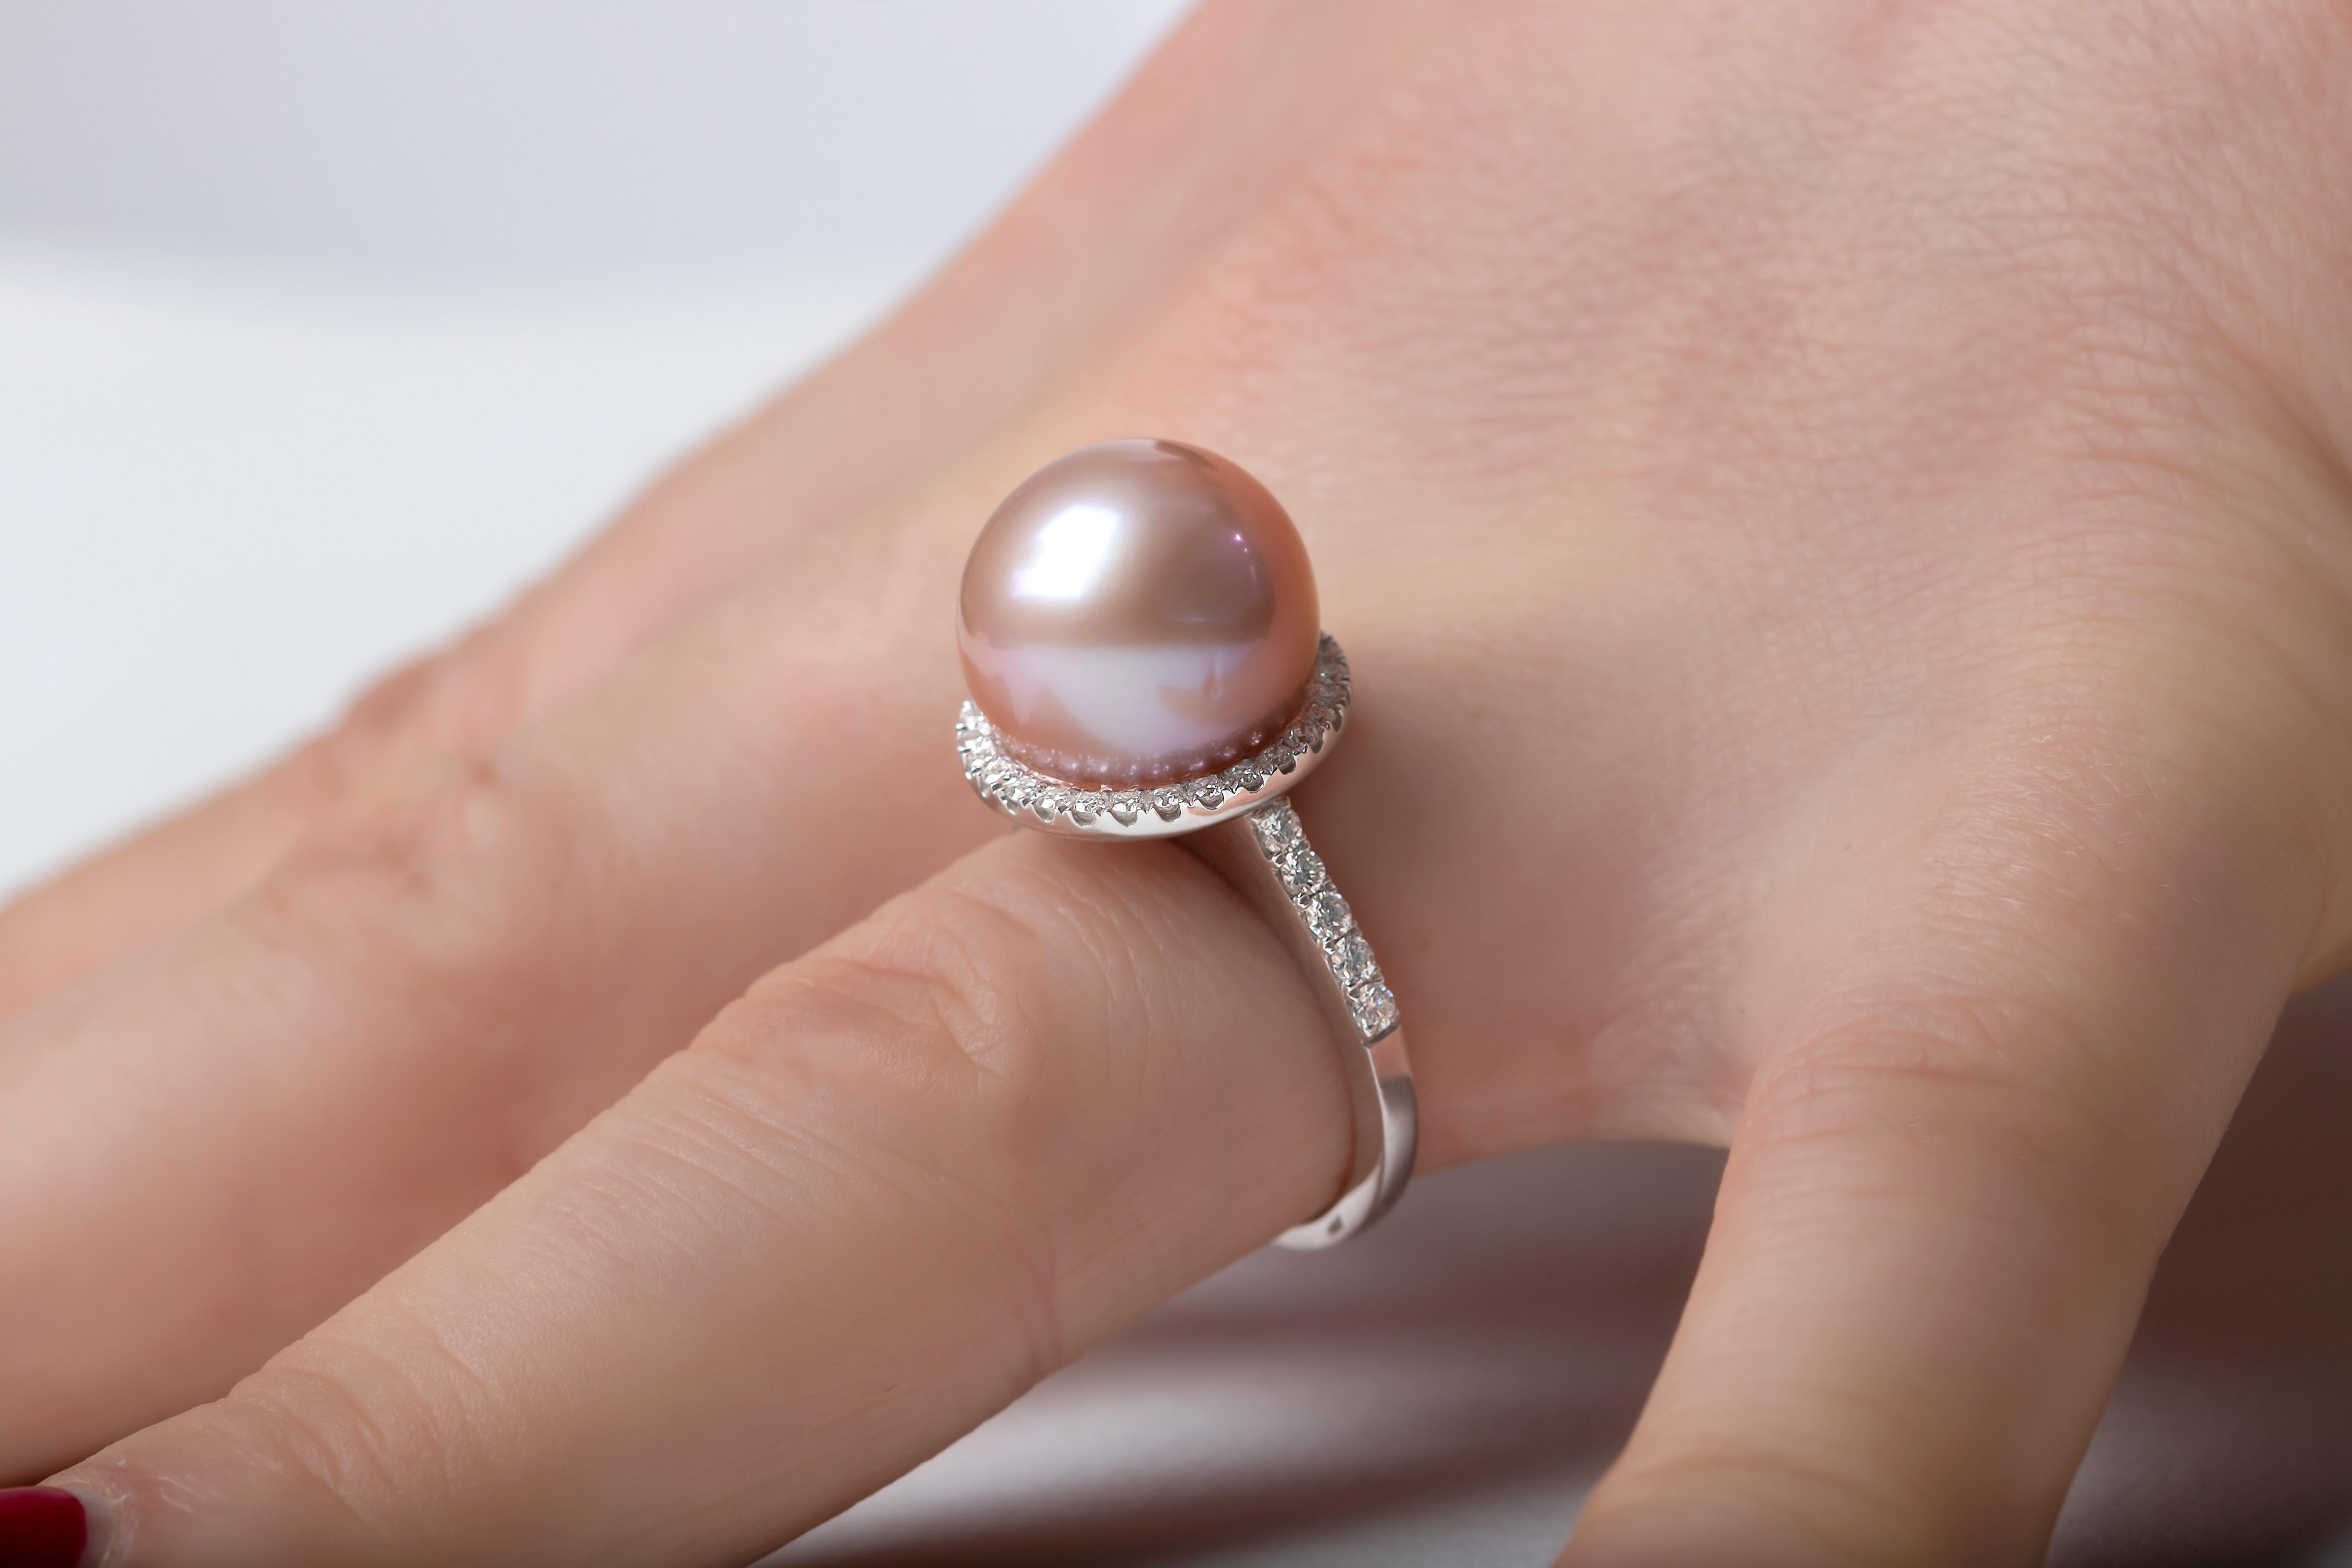 This elegant ring by Yoko London features a lustrous pink Freshwater pearl its centre, with a delicate diamond halo surrounding it. Set in 18 Karat White Gold to enrich the spectacular hues of the pearl and the sparkle of the diamonds, this ring